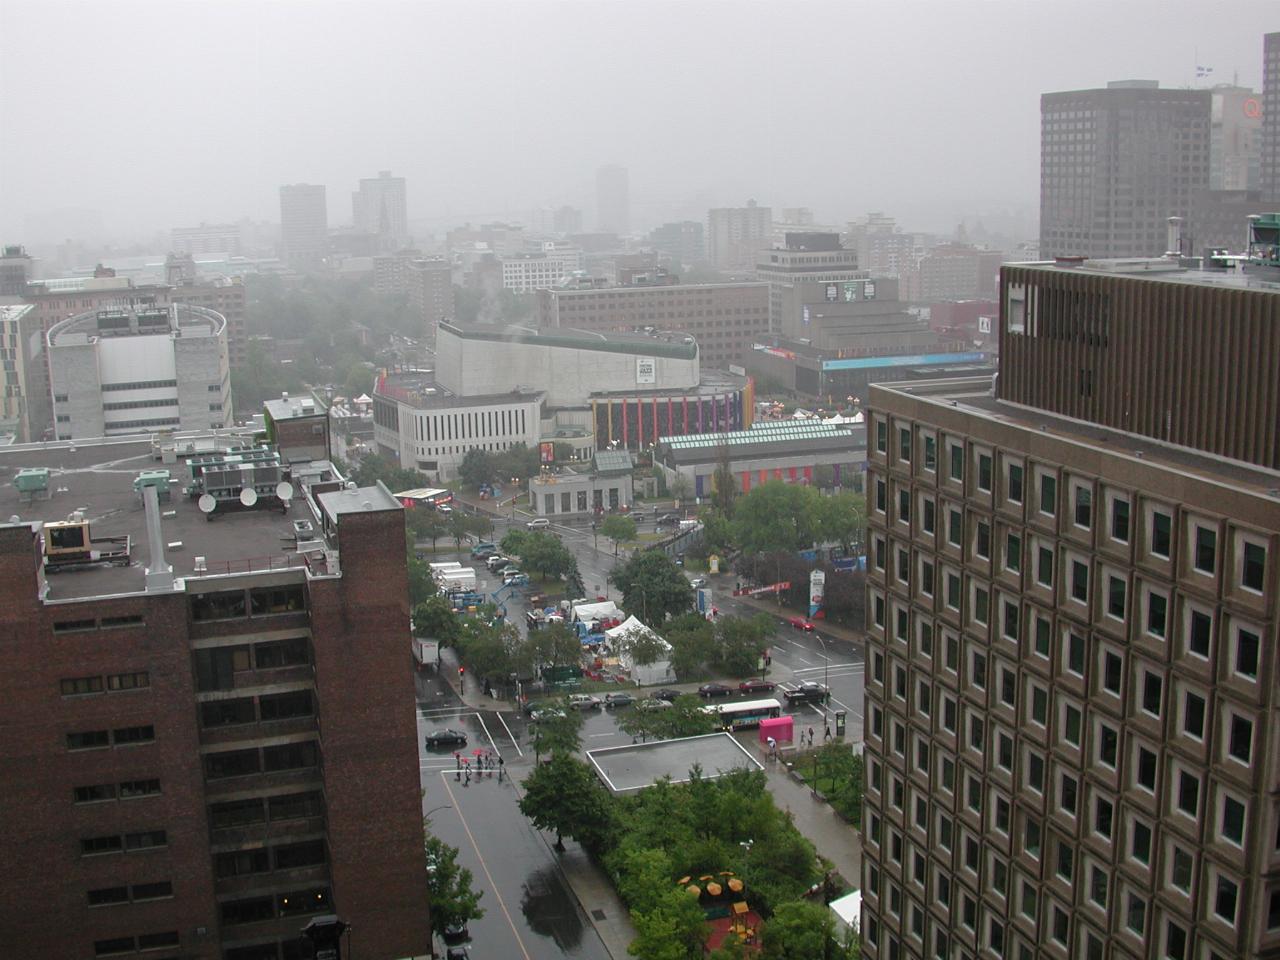 A wet day, not great for outdoor portion of the Jazz Festival around Place des Arts